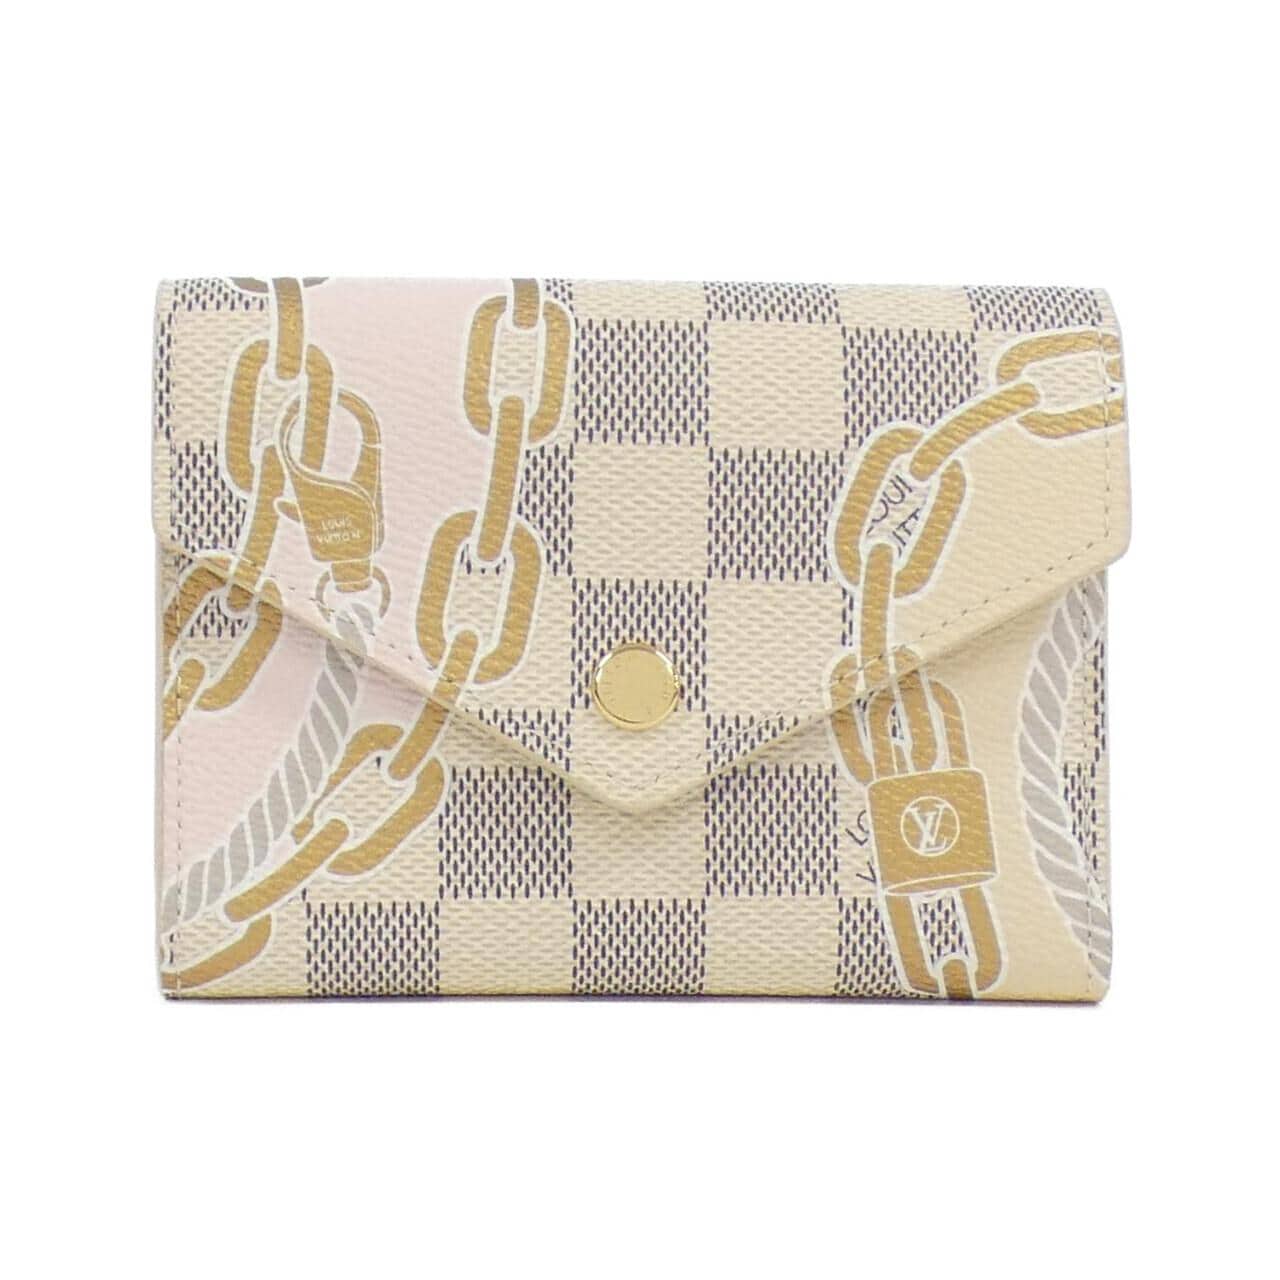 LOUIS VUITTON Damier Azur (Rope and Chain) Portefeuille Victorine N40468 Wallet